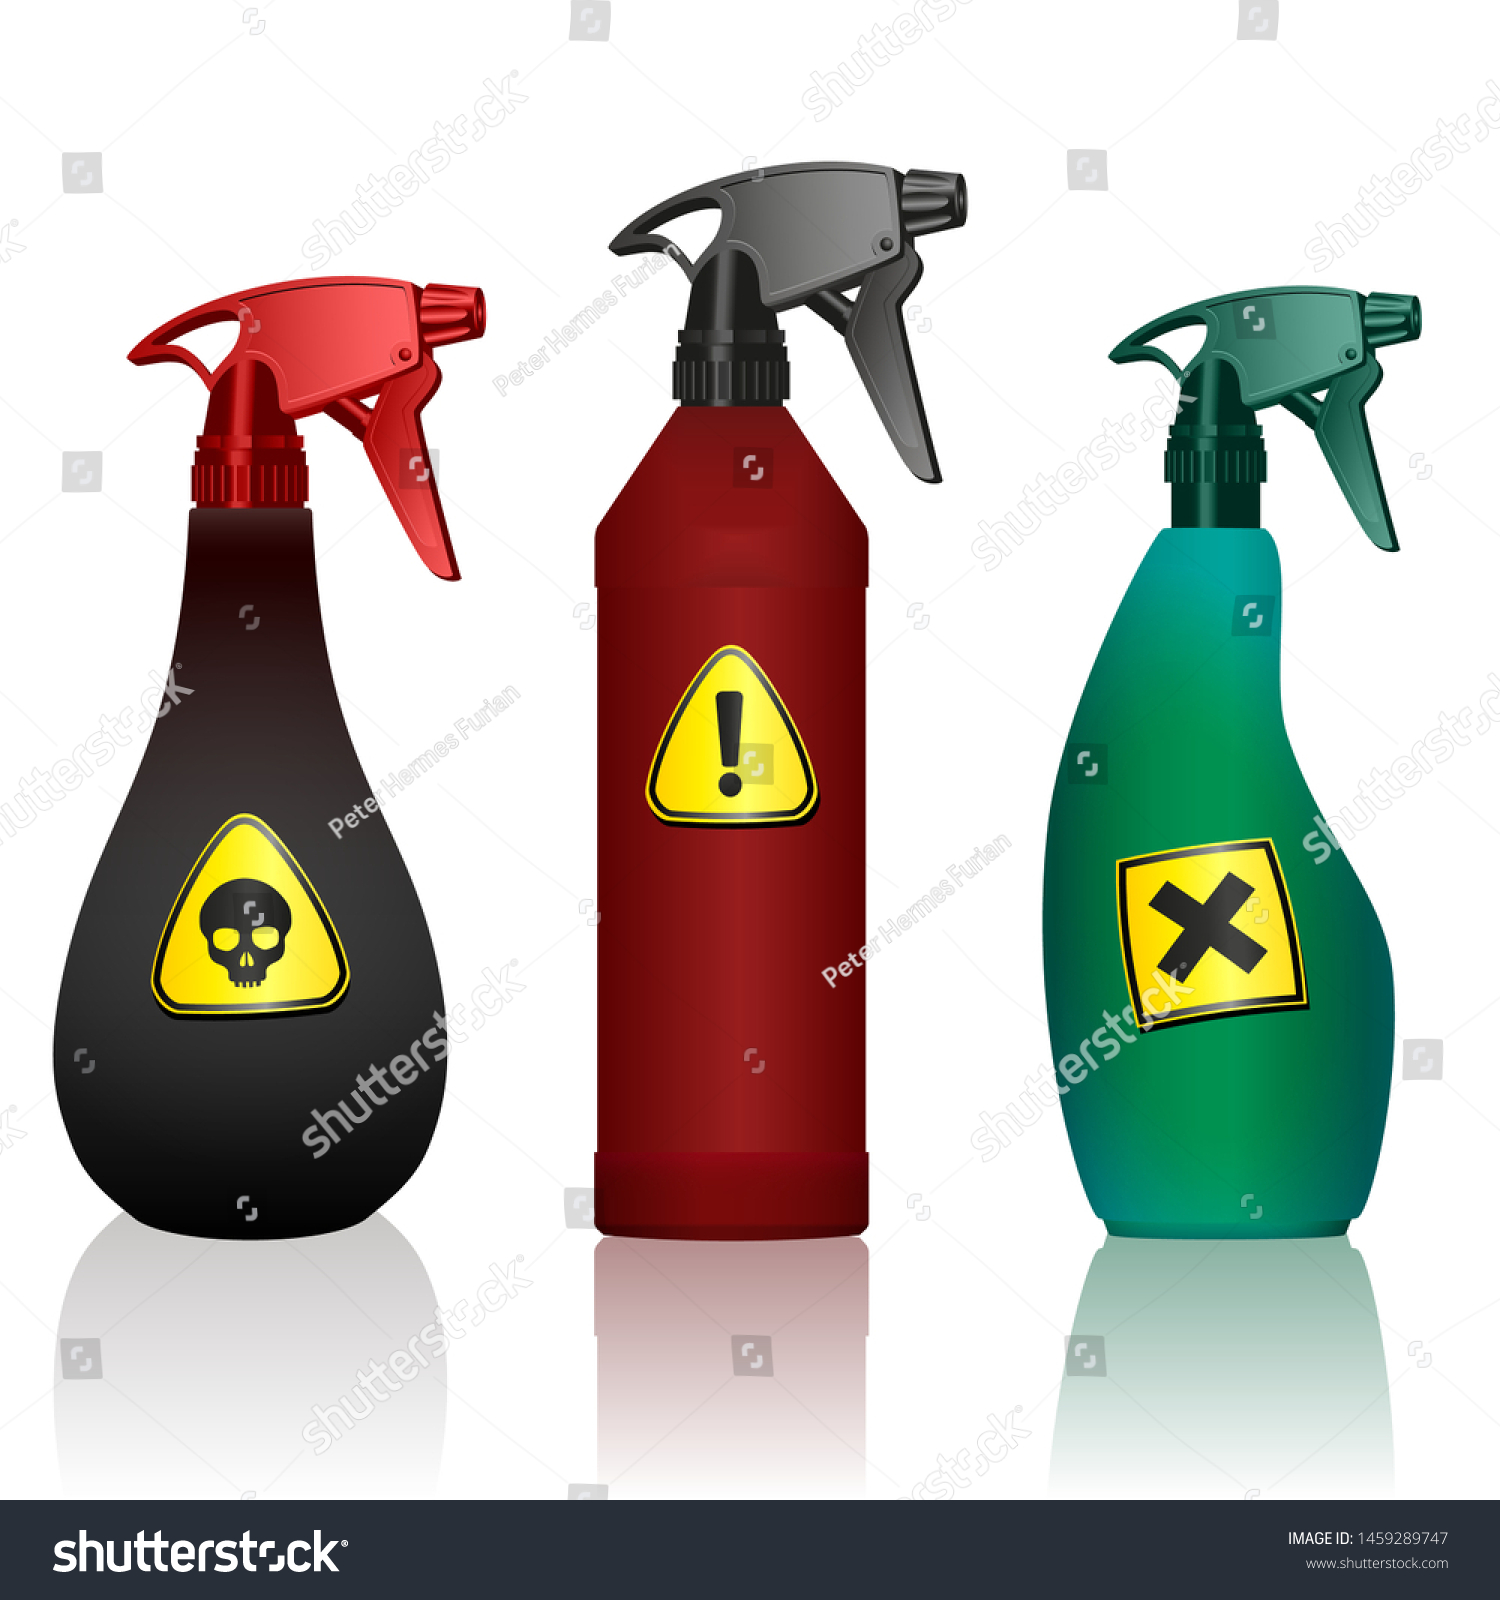 SVG of Poison spray bottles. Toxins, insecticides, pesticides, biocides with hazard warning signs. Caution poisonous. Isolated vector on white background.
 svg